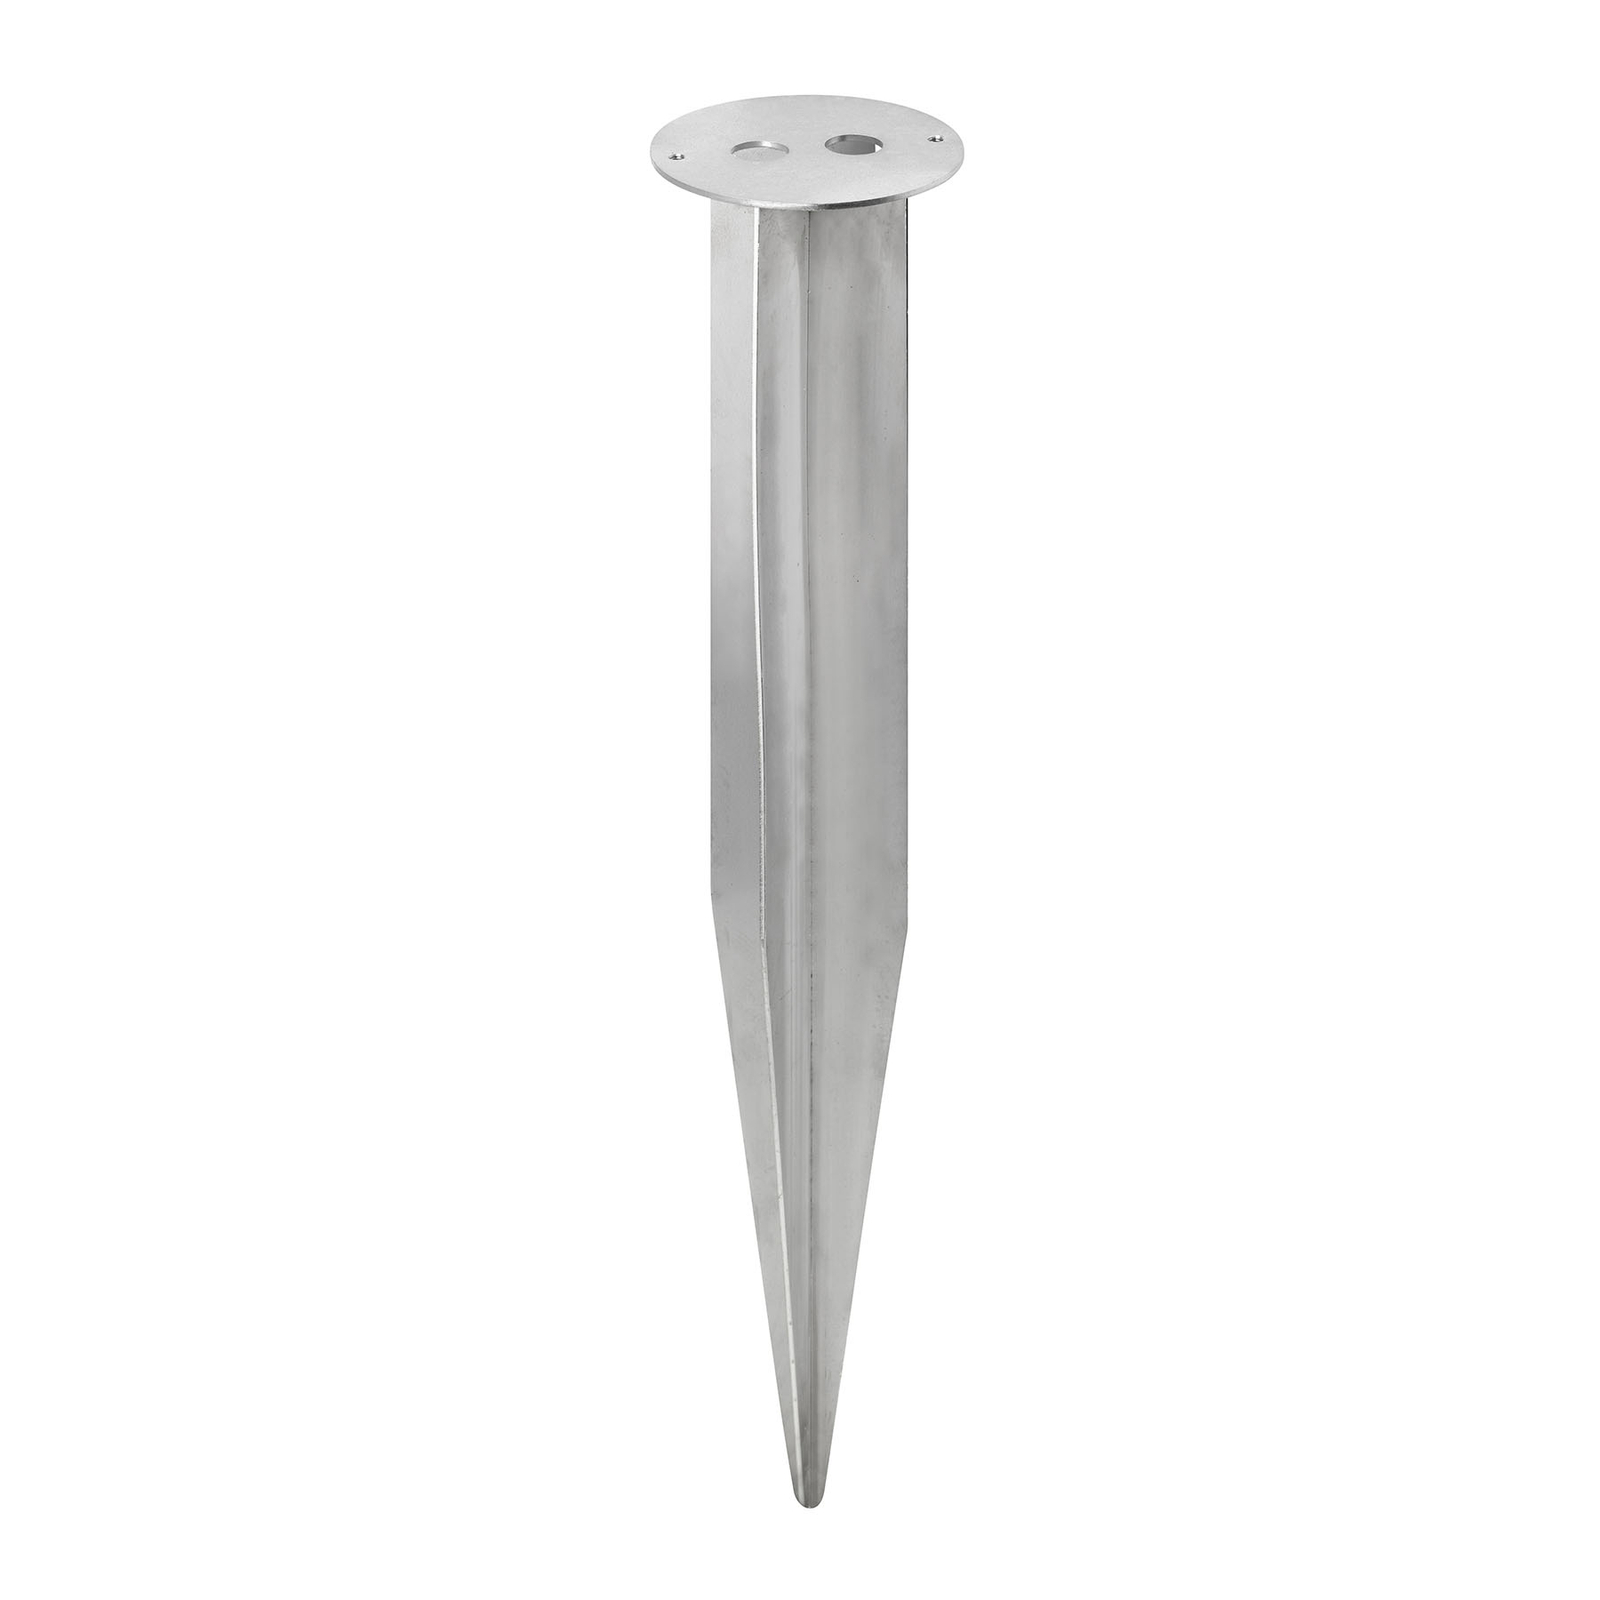 Ground spike for 5100/5101 outdoor lights